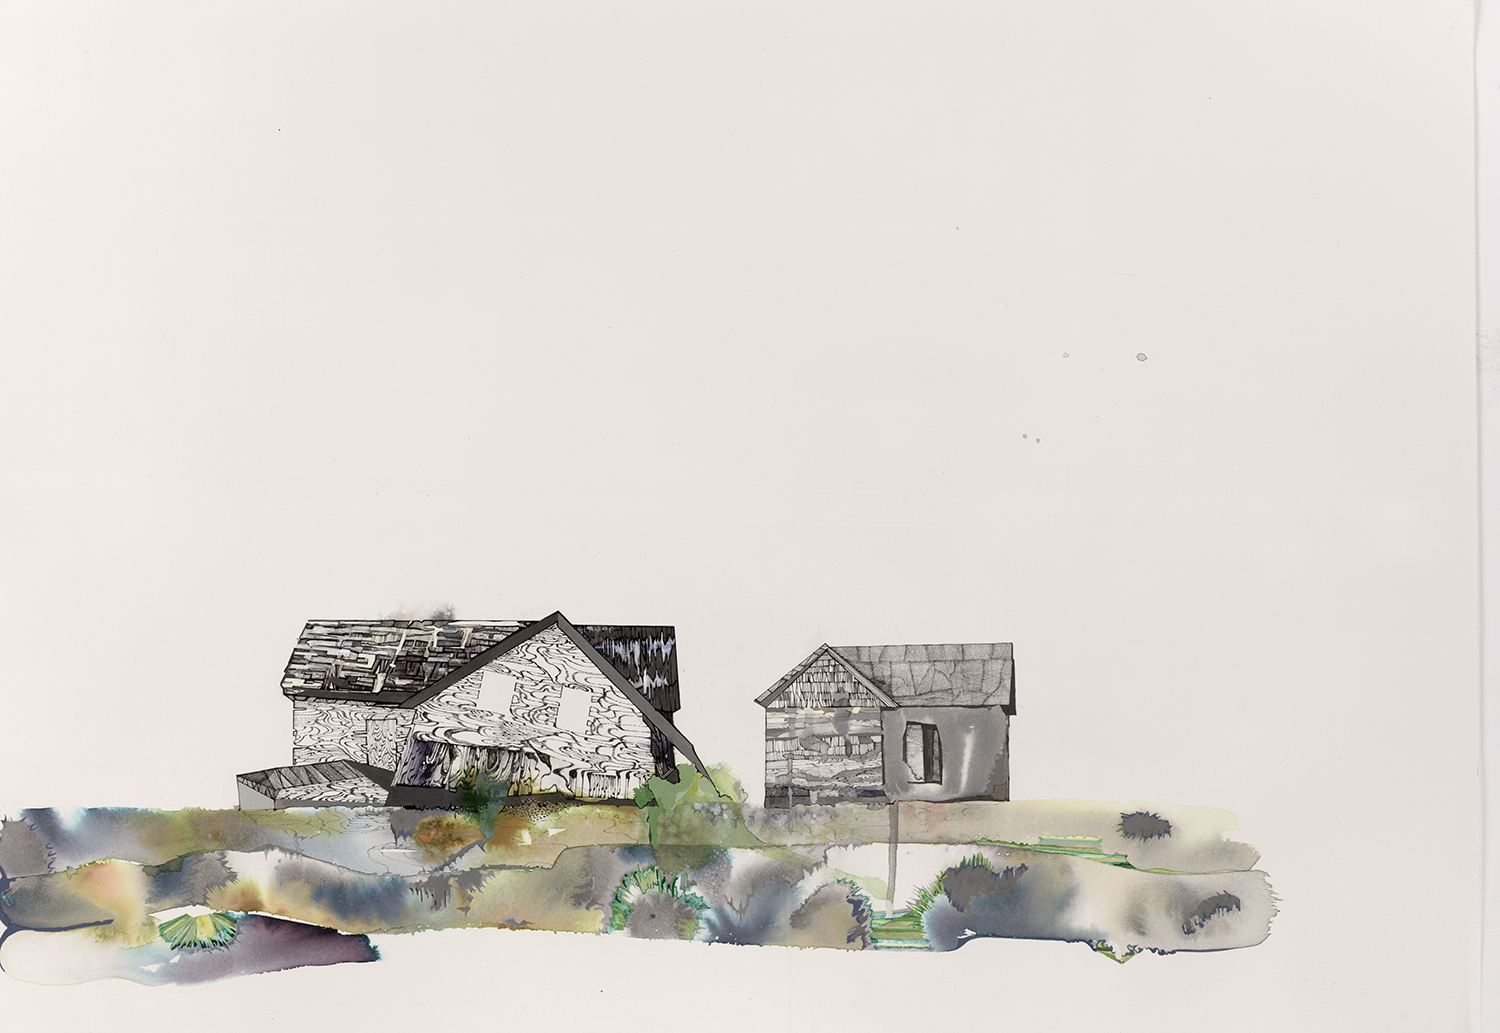  Last House on Holland Island -&nbsp;22”x 30, ink, gouache, graphite on paper, 2015 